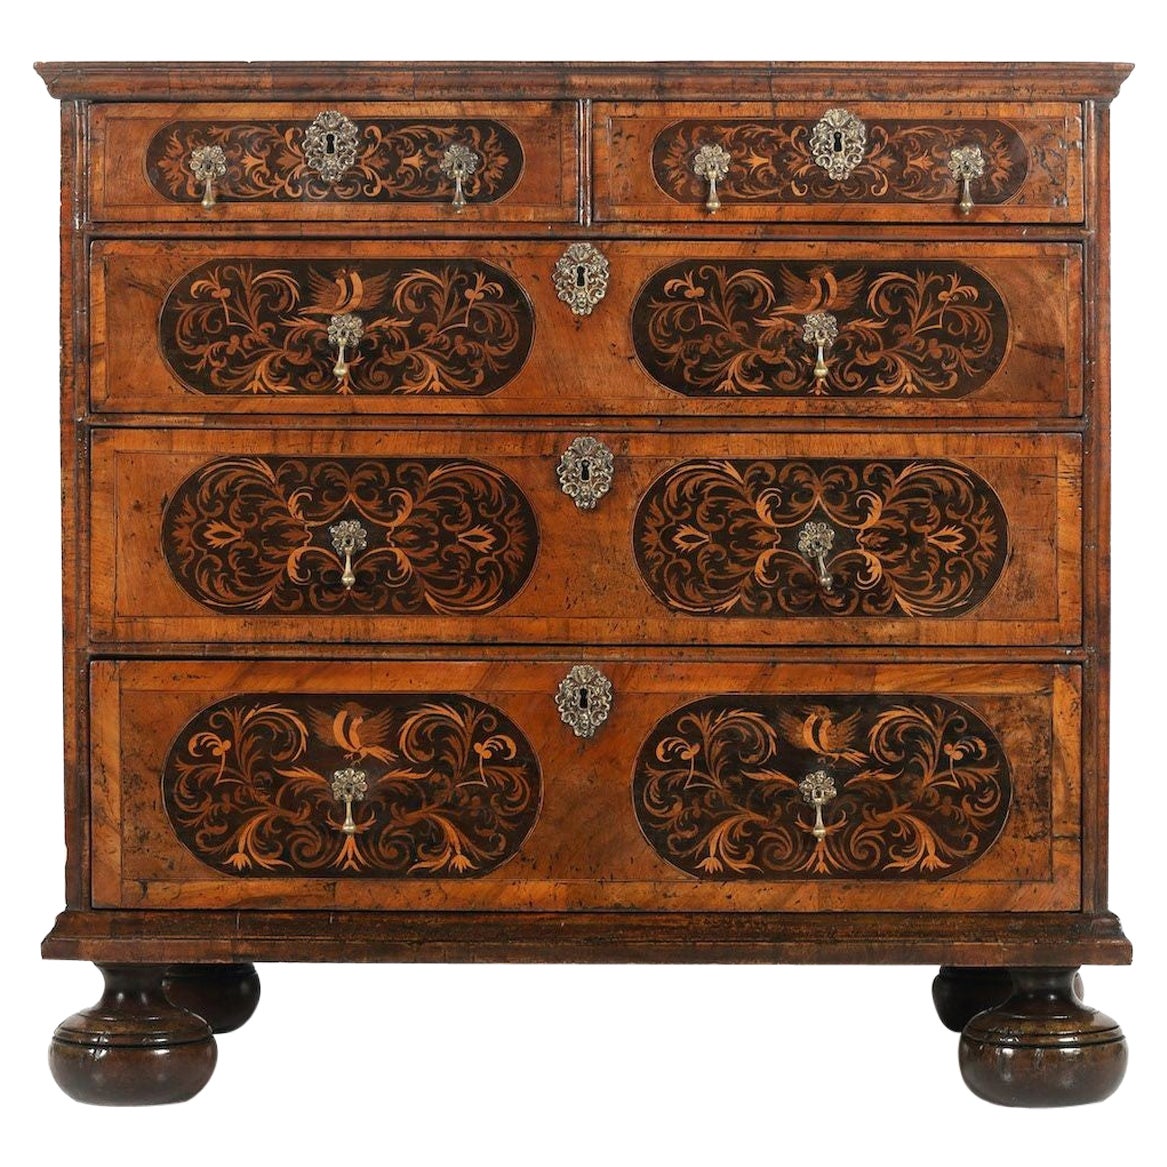 17th c. English William & Mary Walnut and Ebony Seaweed Marquetry Commode For Sale